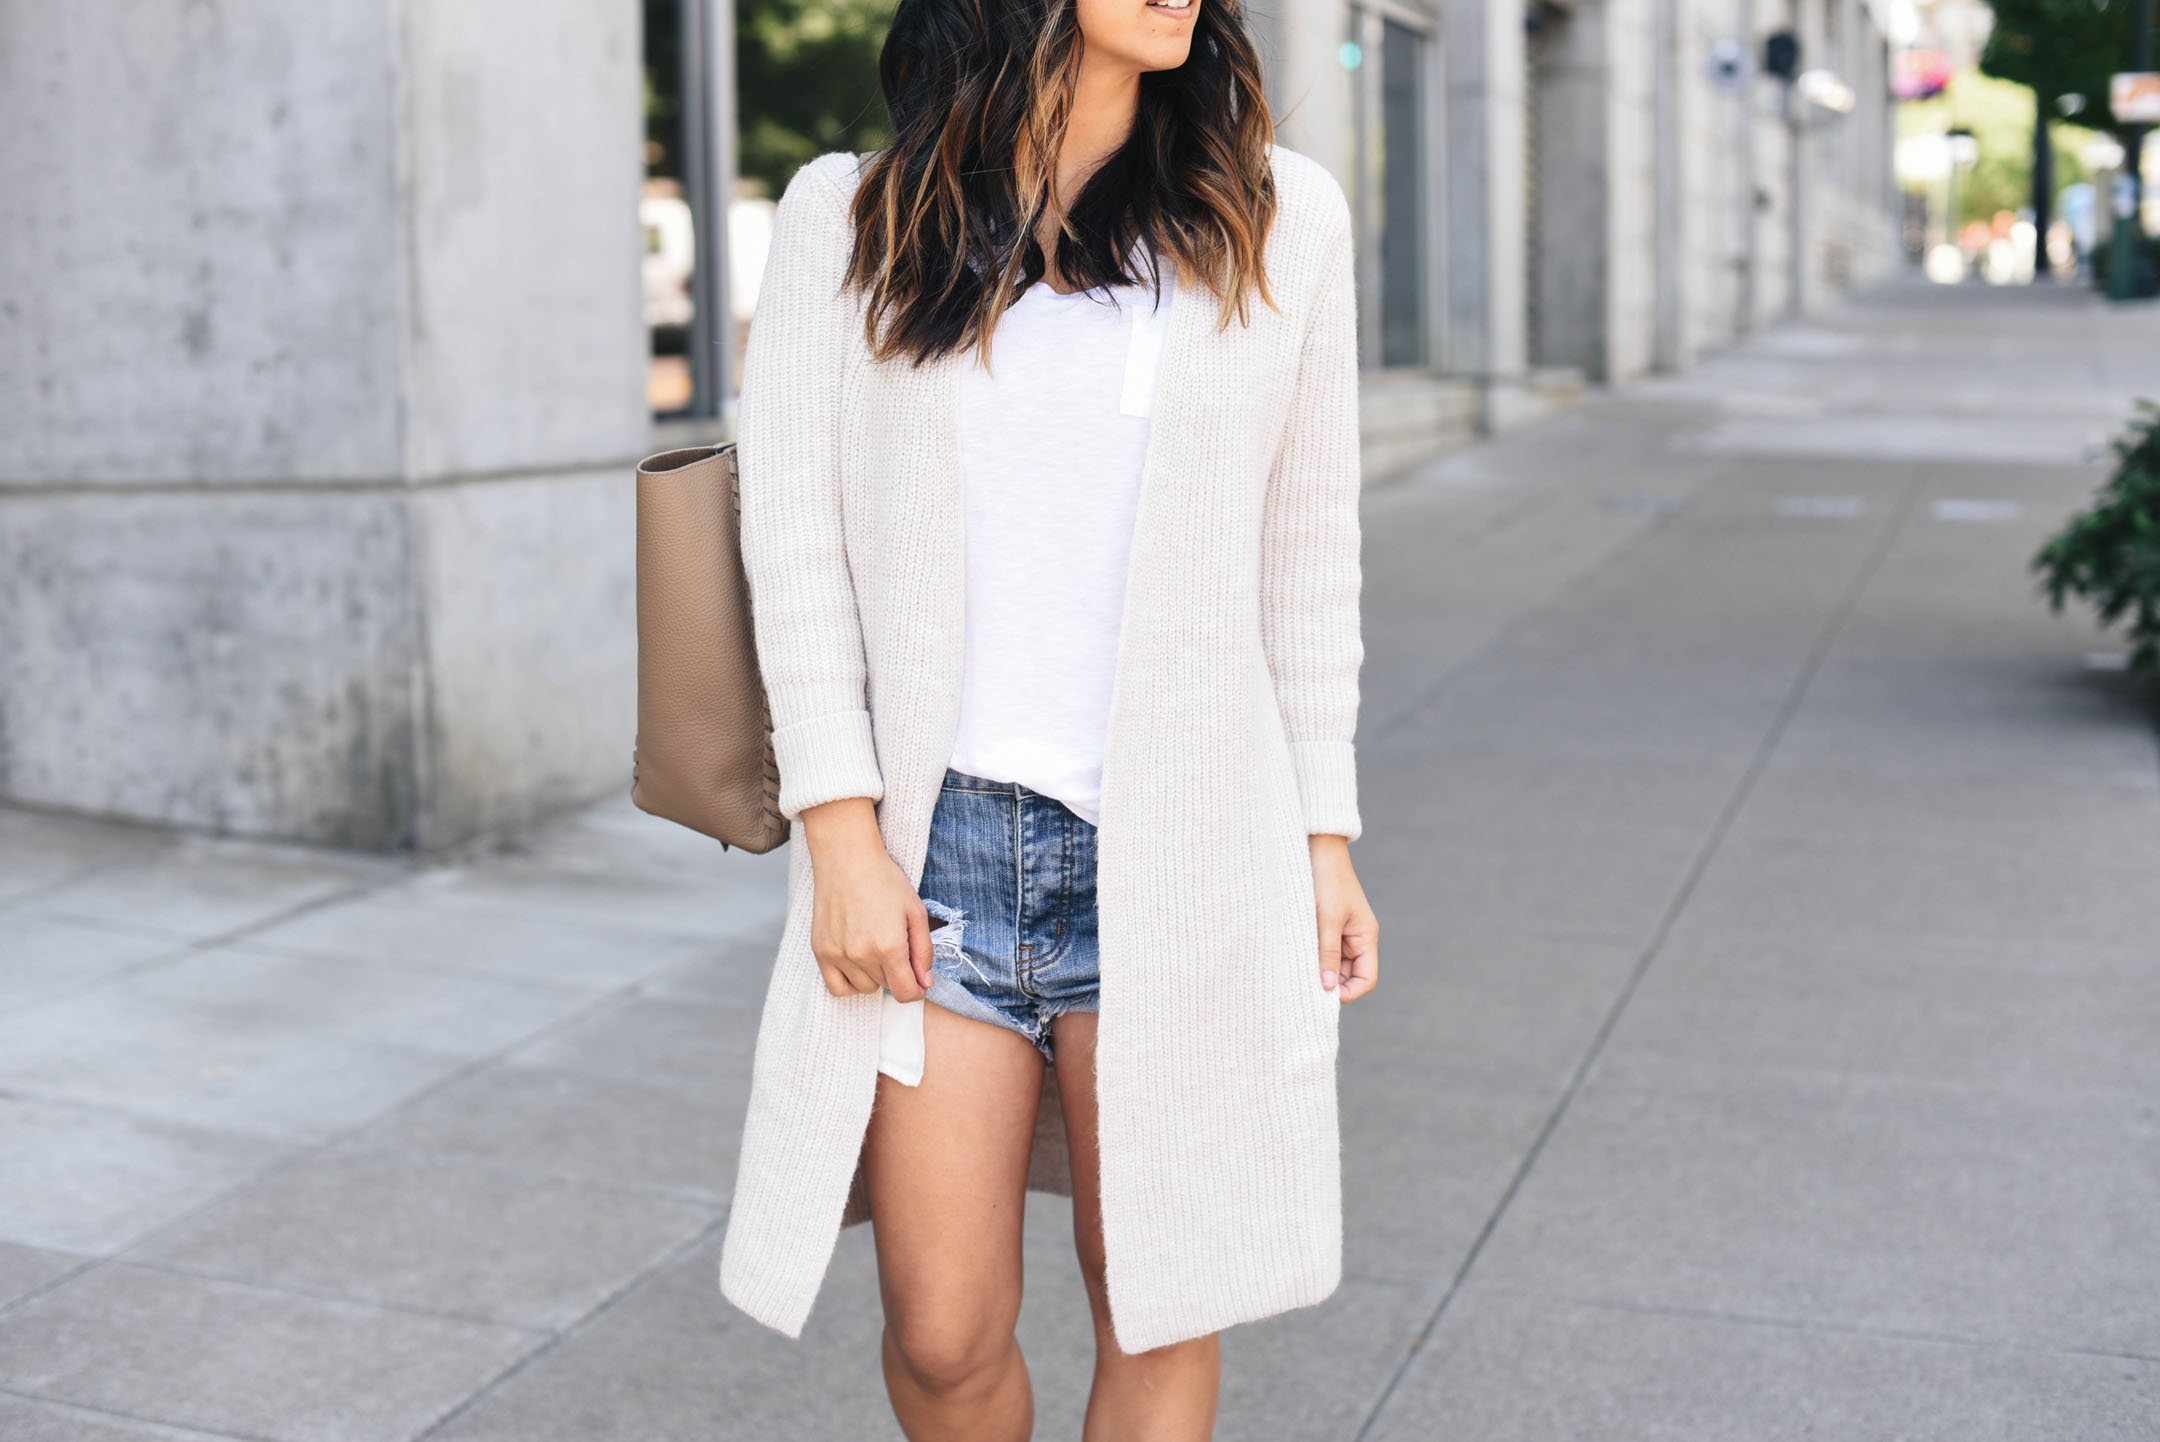 Cardigan styled in the summer